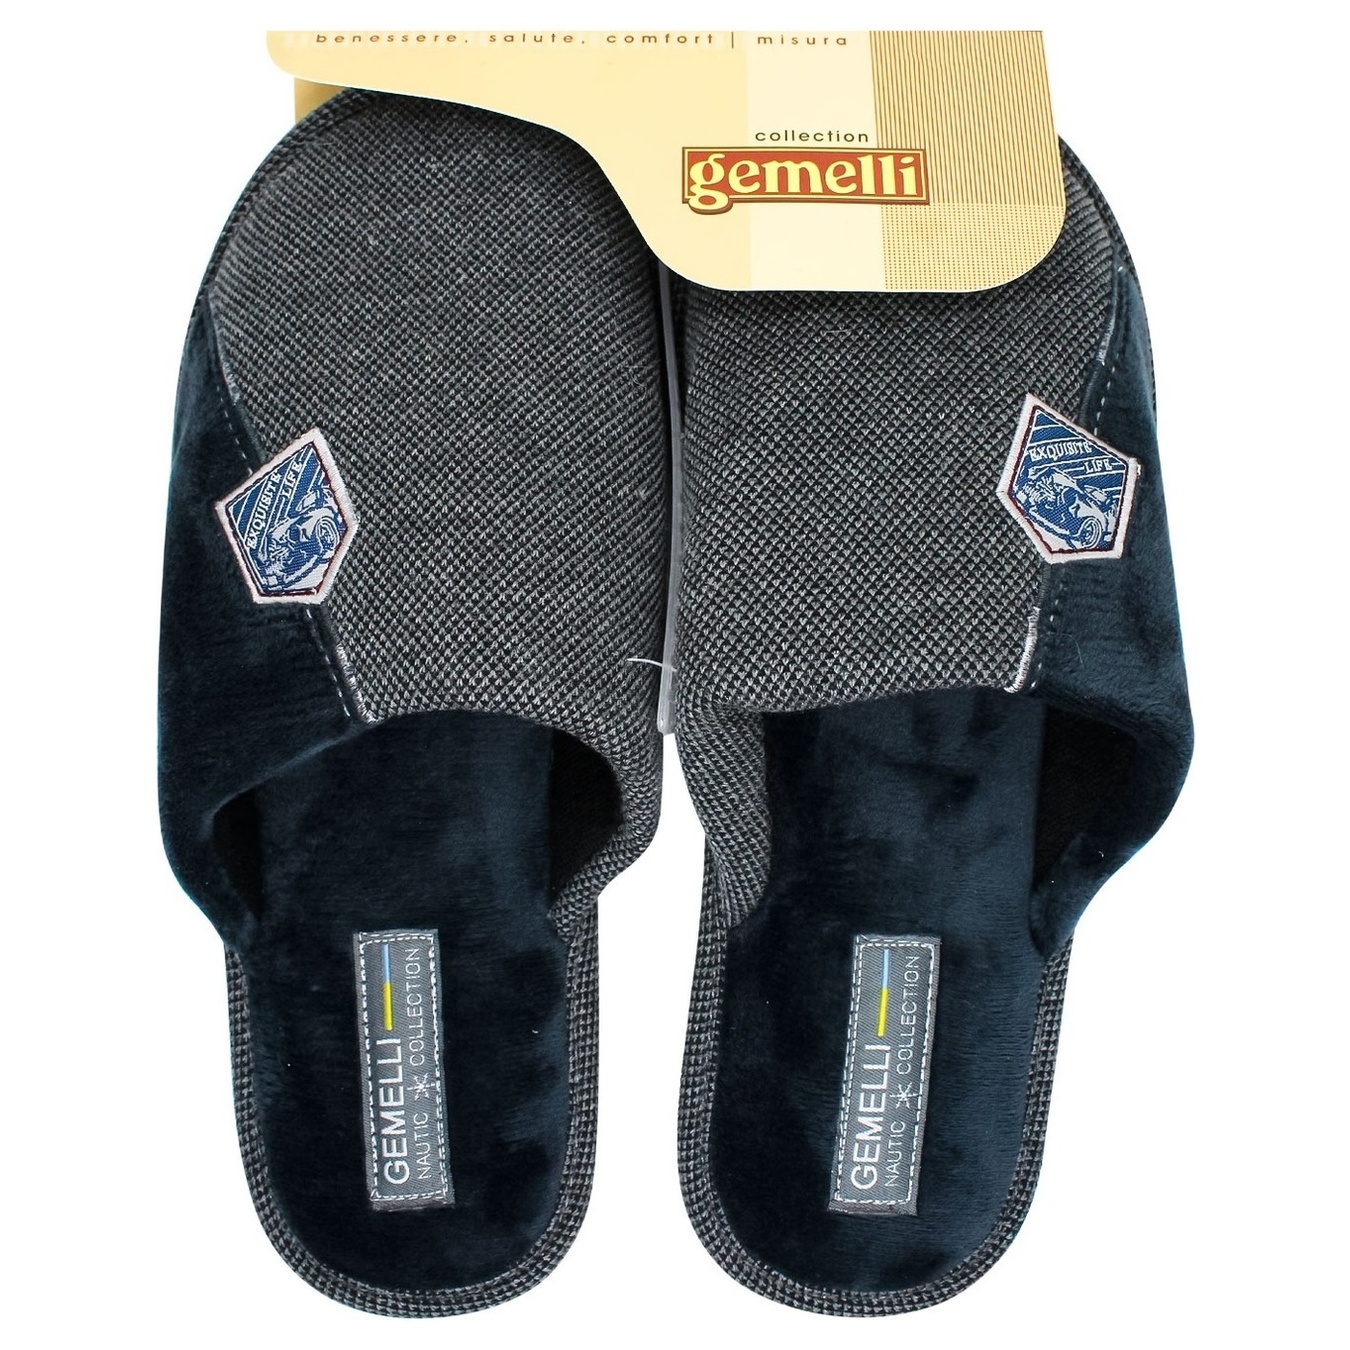 Home shoes Gemelli Maurice for men 41-49 years old.